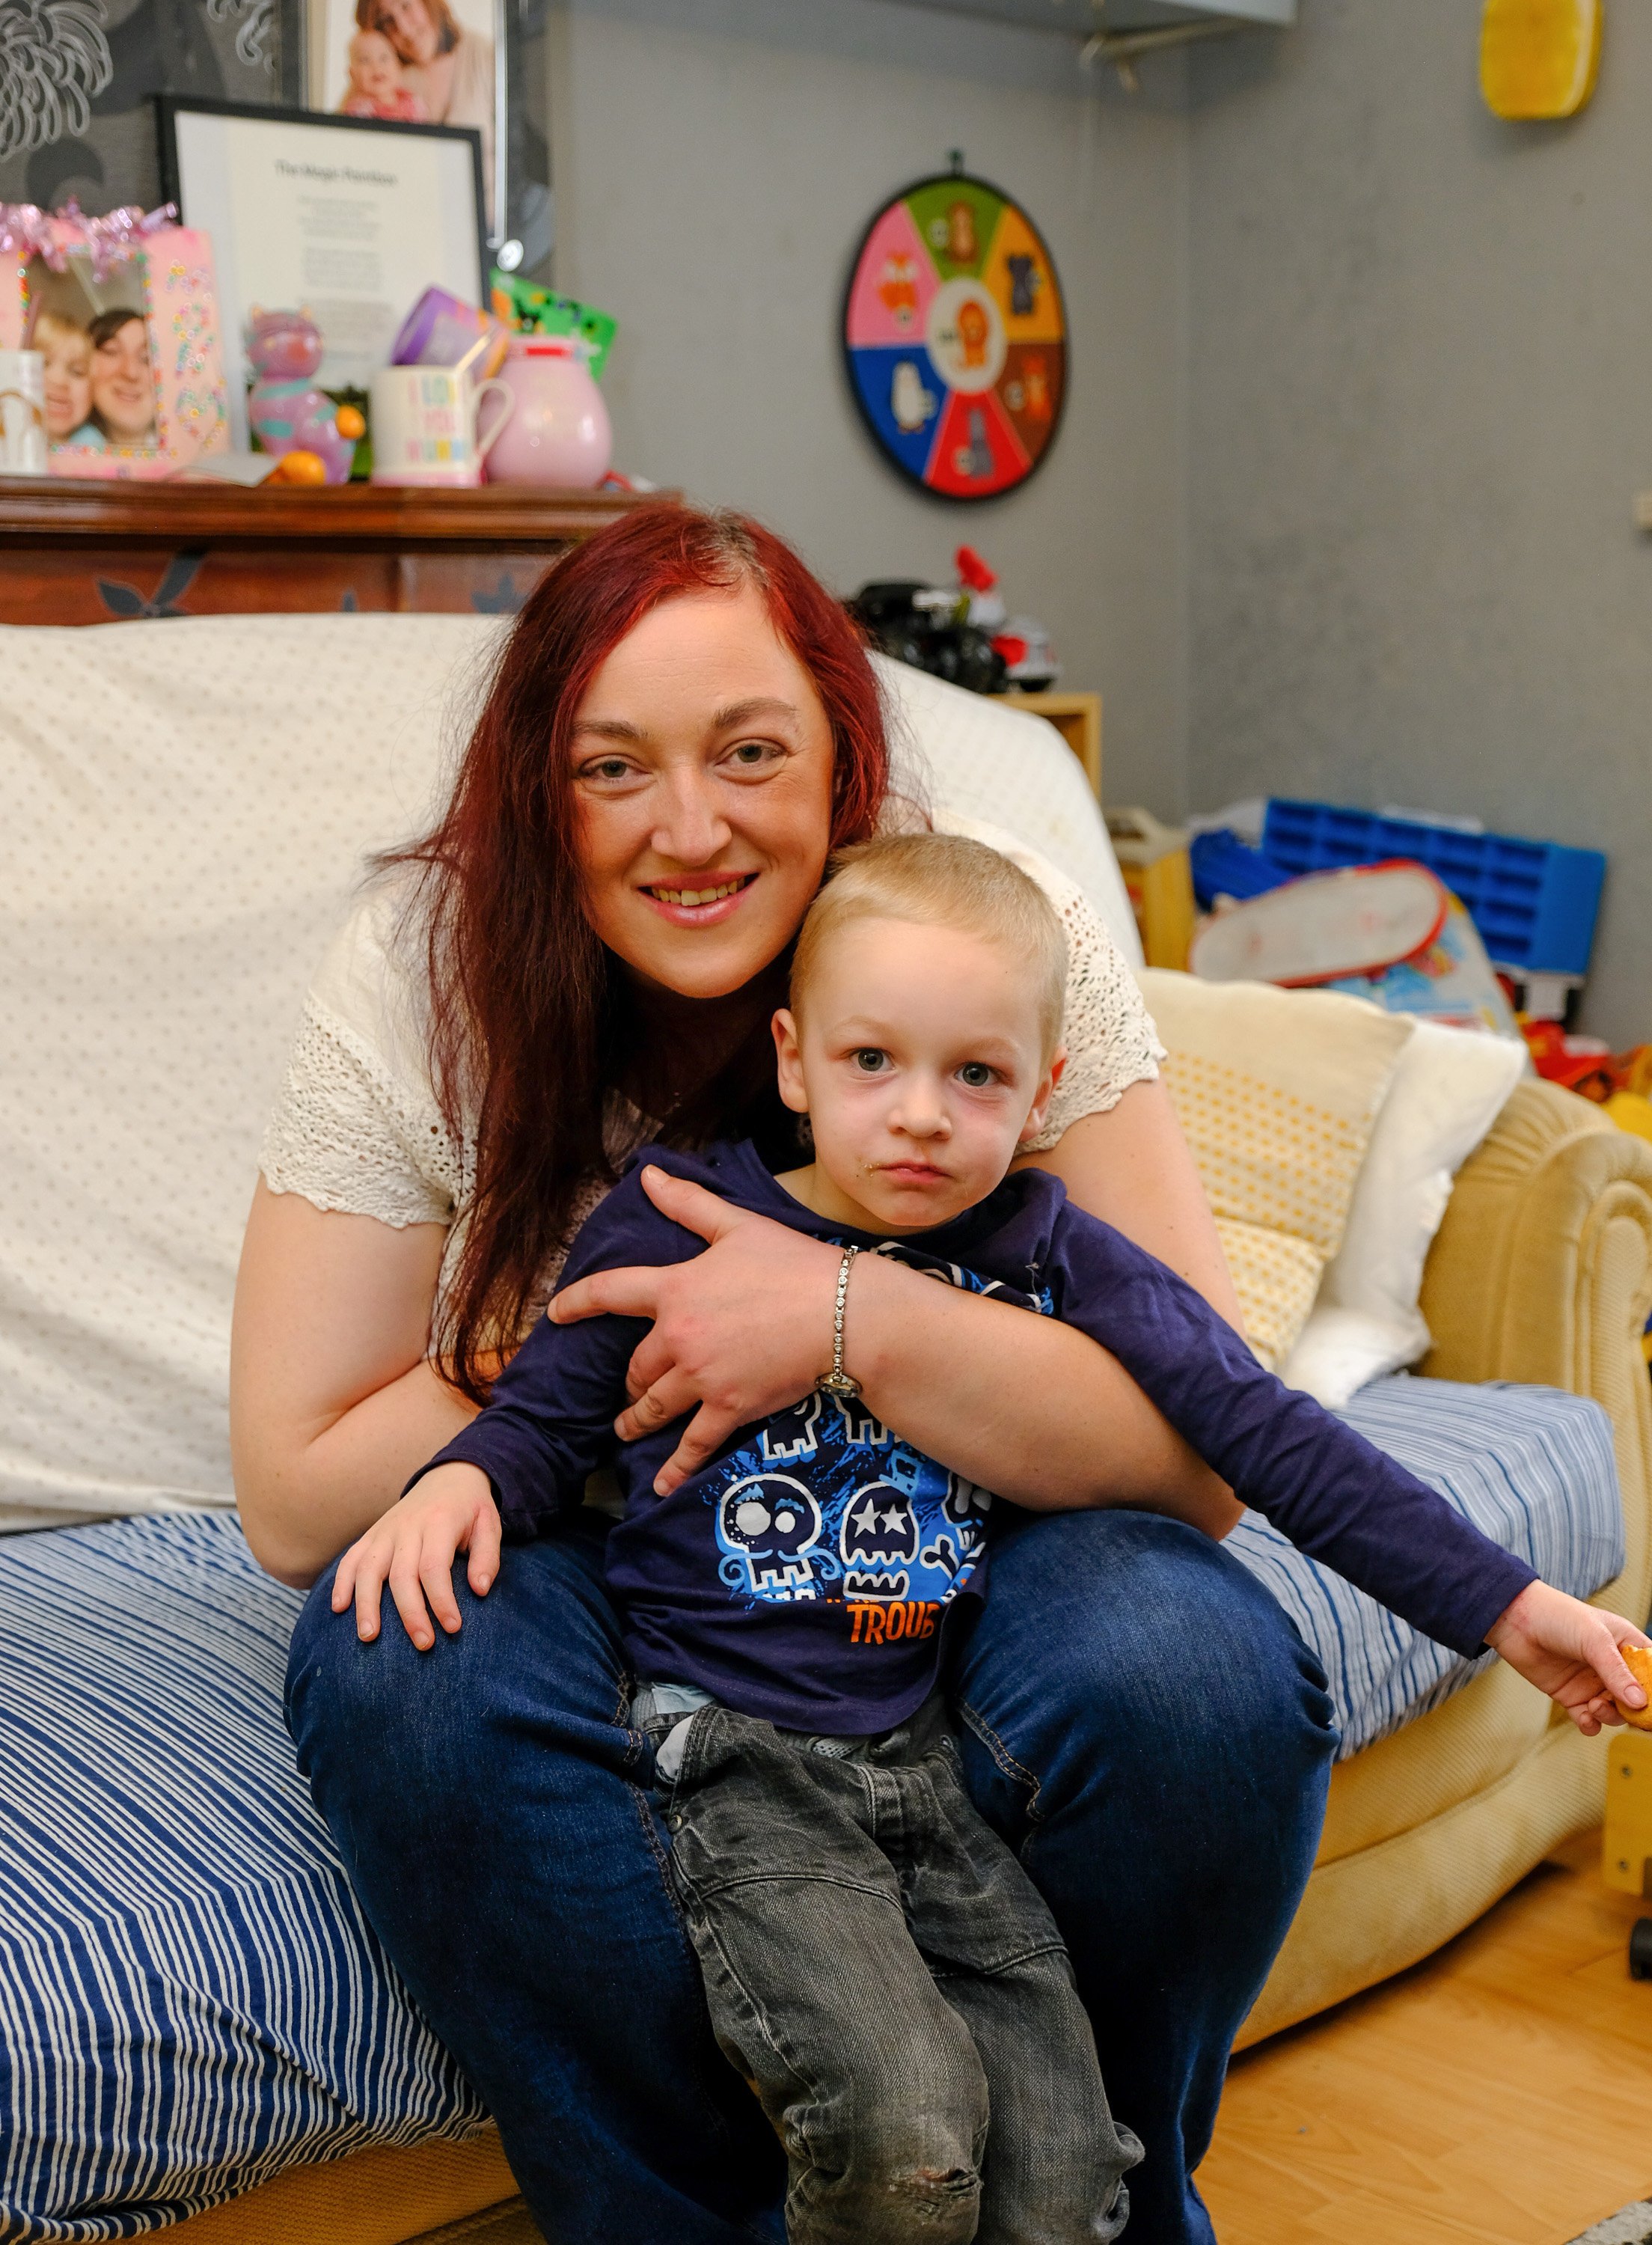 Thomas Boffey, 3, rang 999 using what he had learned from a YouTube cartoon to help save his mum Kayleigh